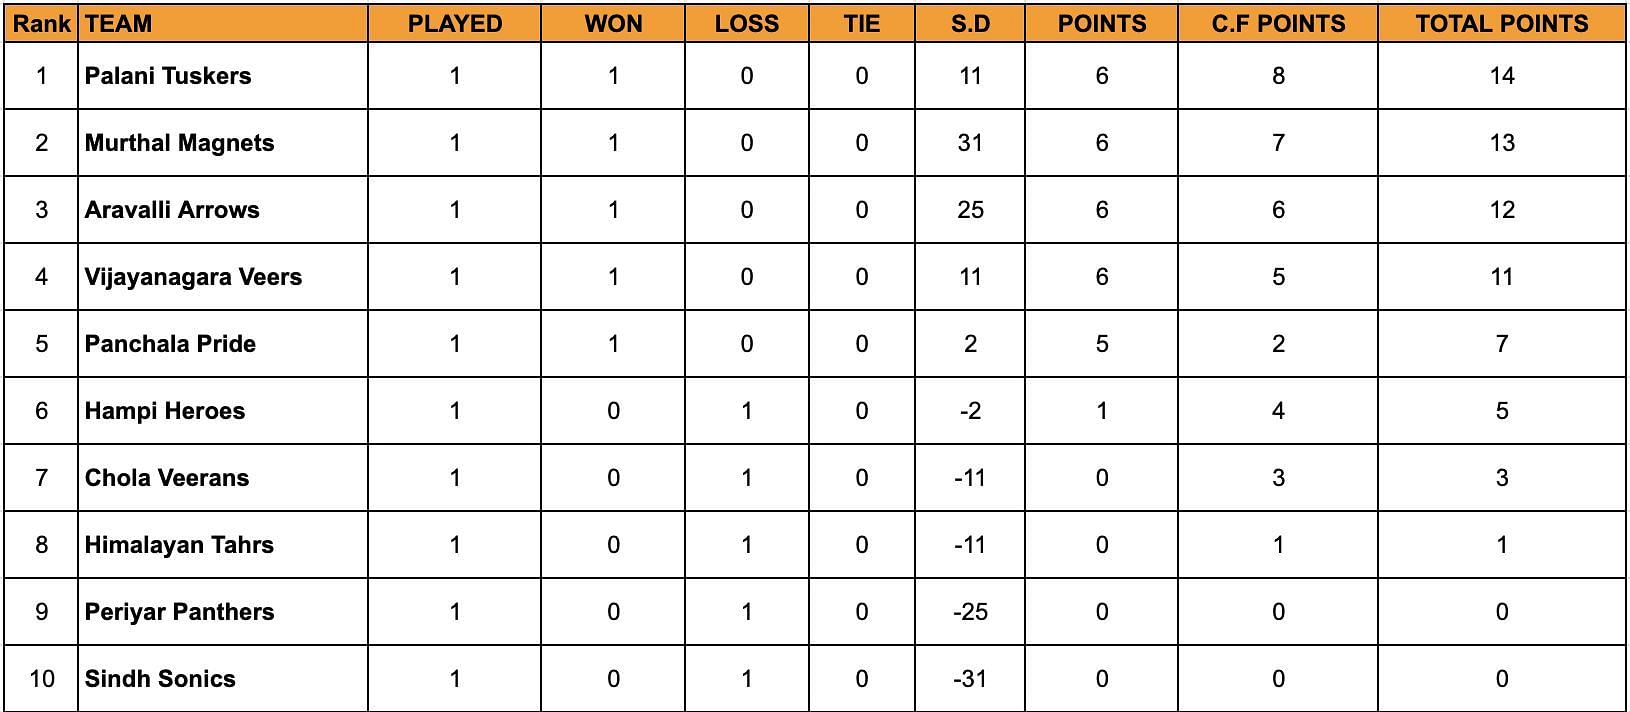 YKS Standings after Day 1 of Challenger Round.